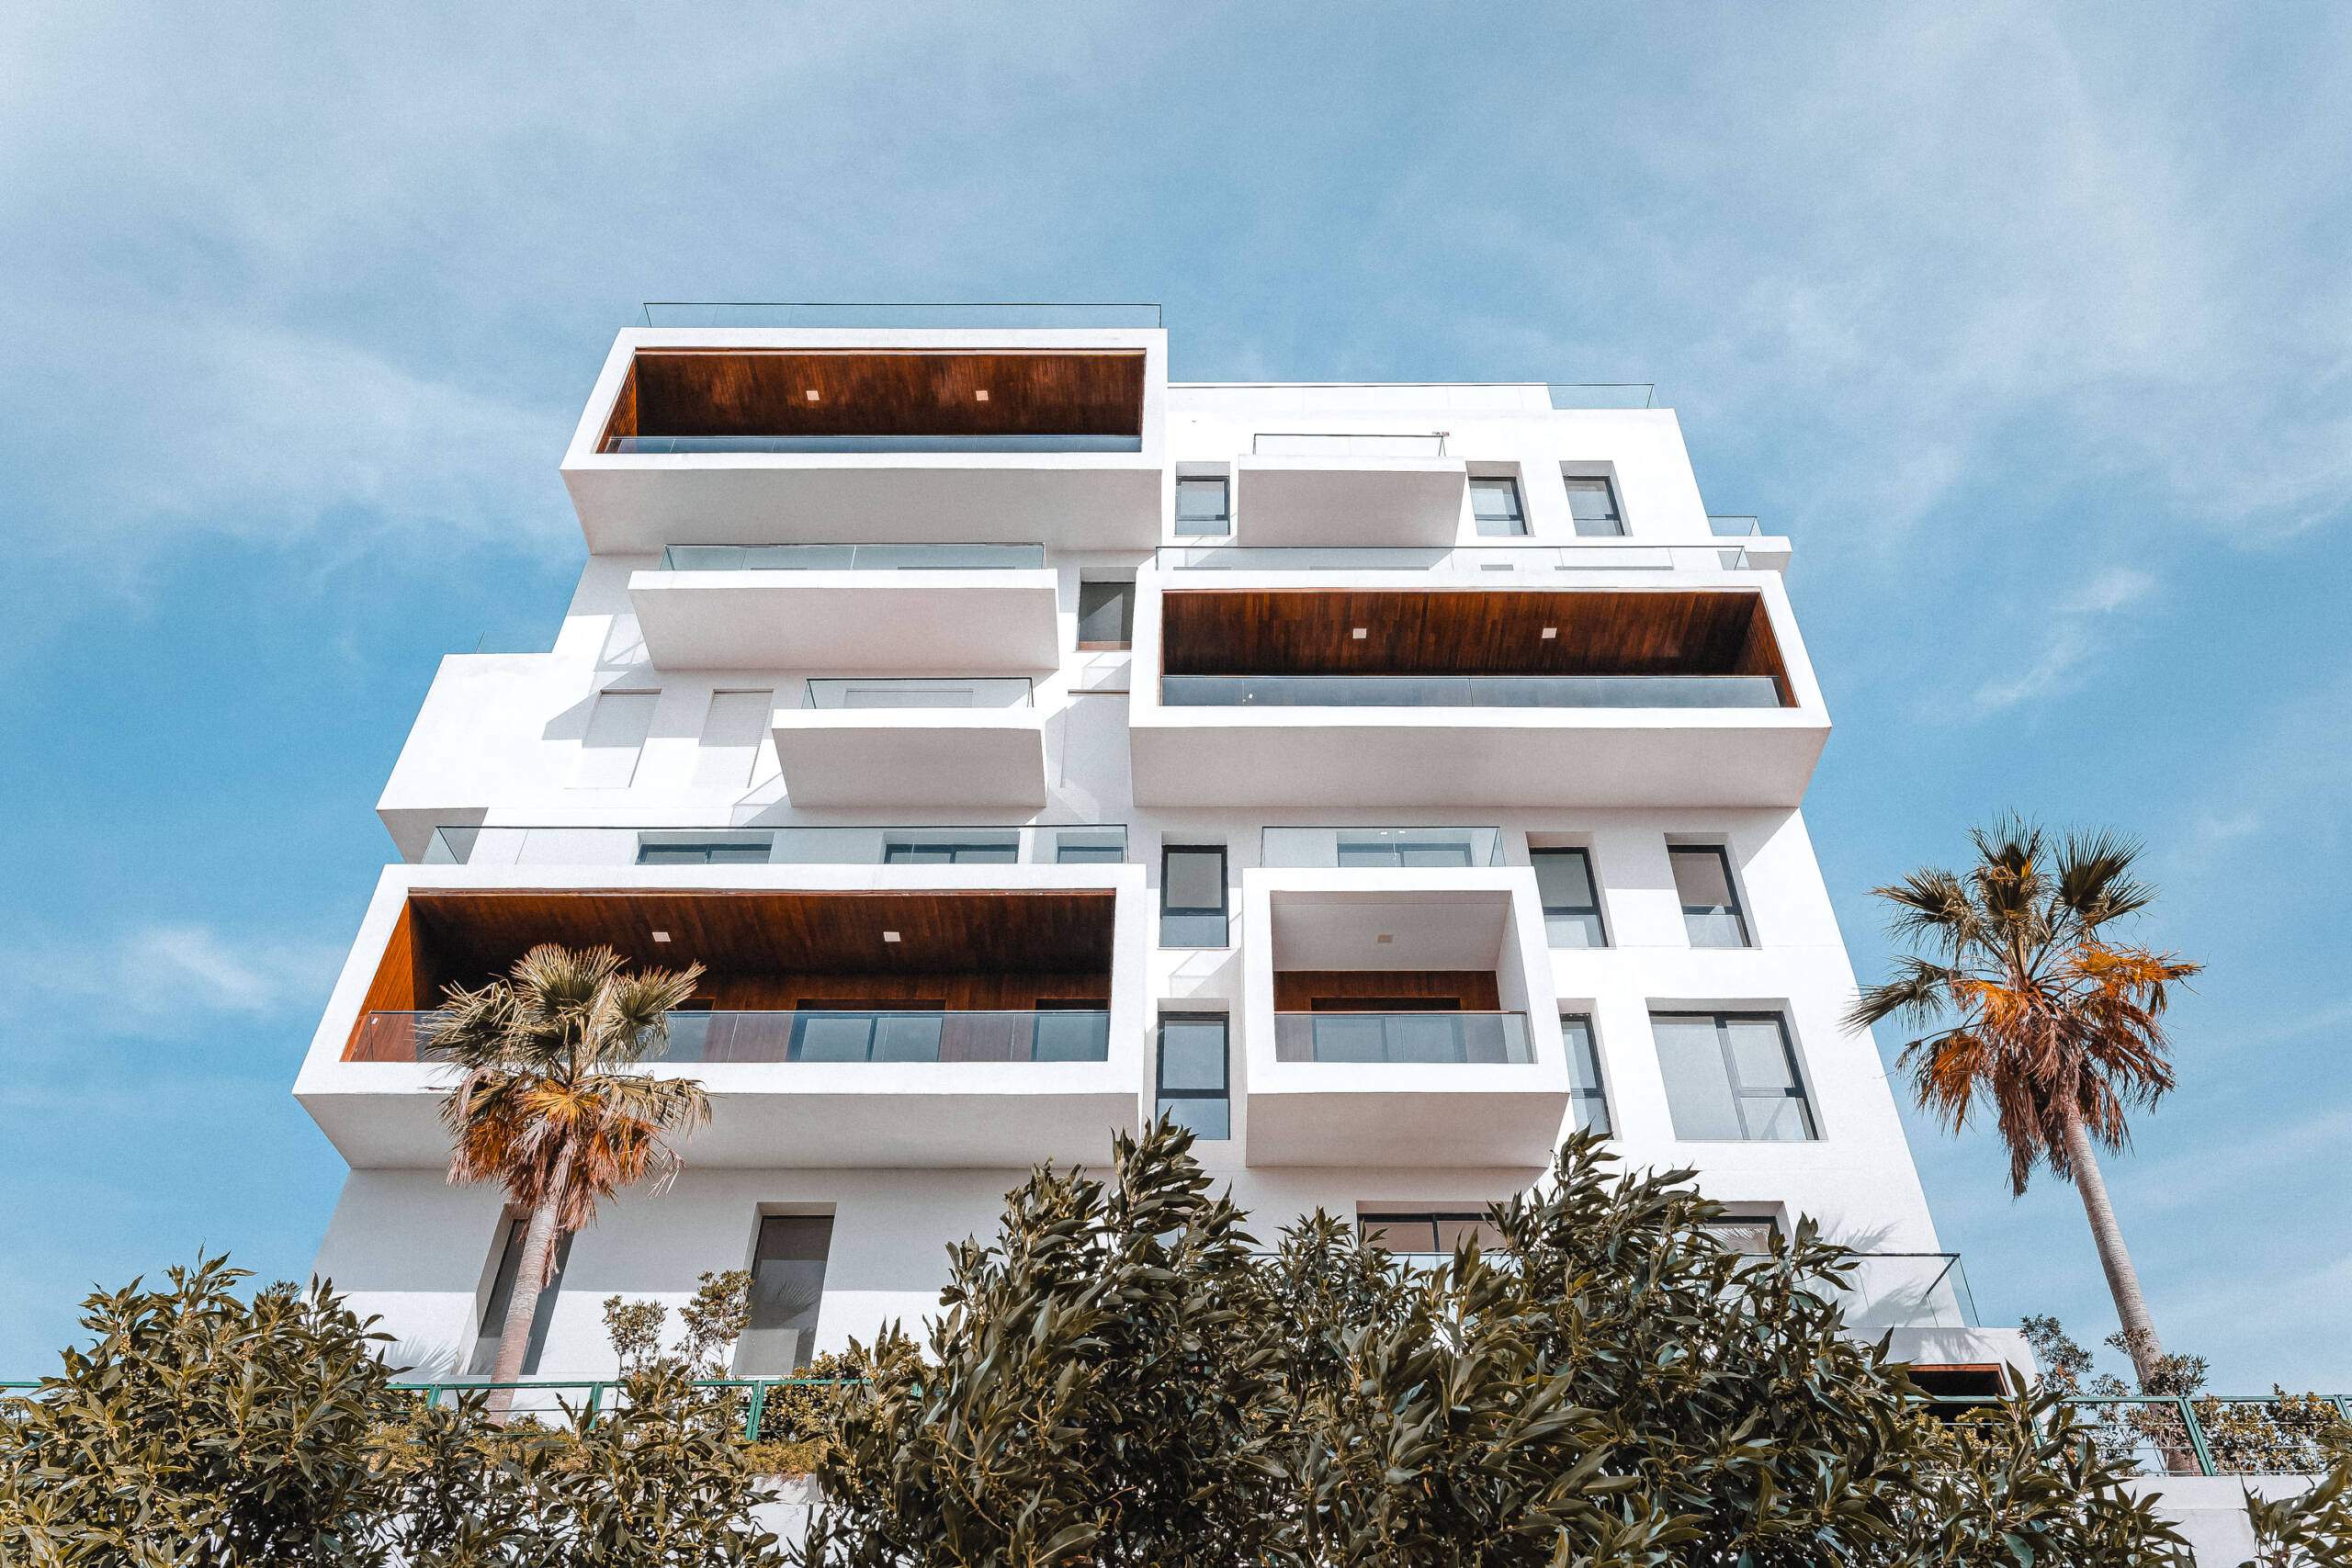 YDA Architects  – Architecture Photography of Horizon Hill Apartment Building in Tangier